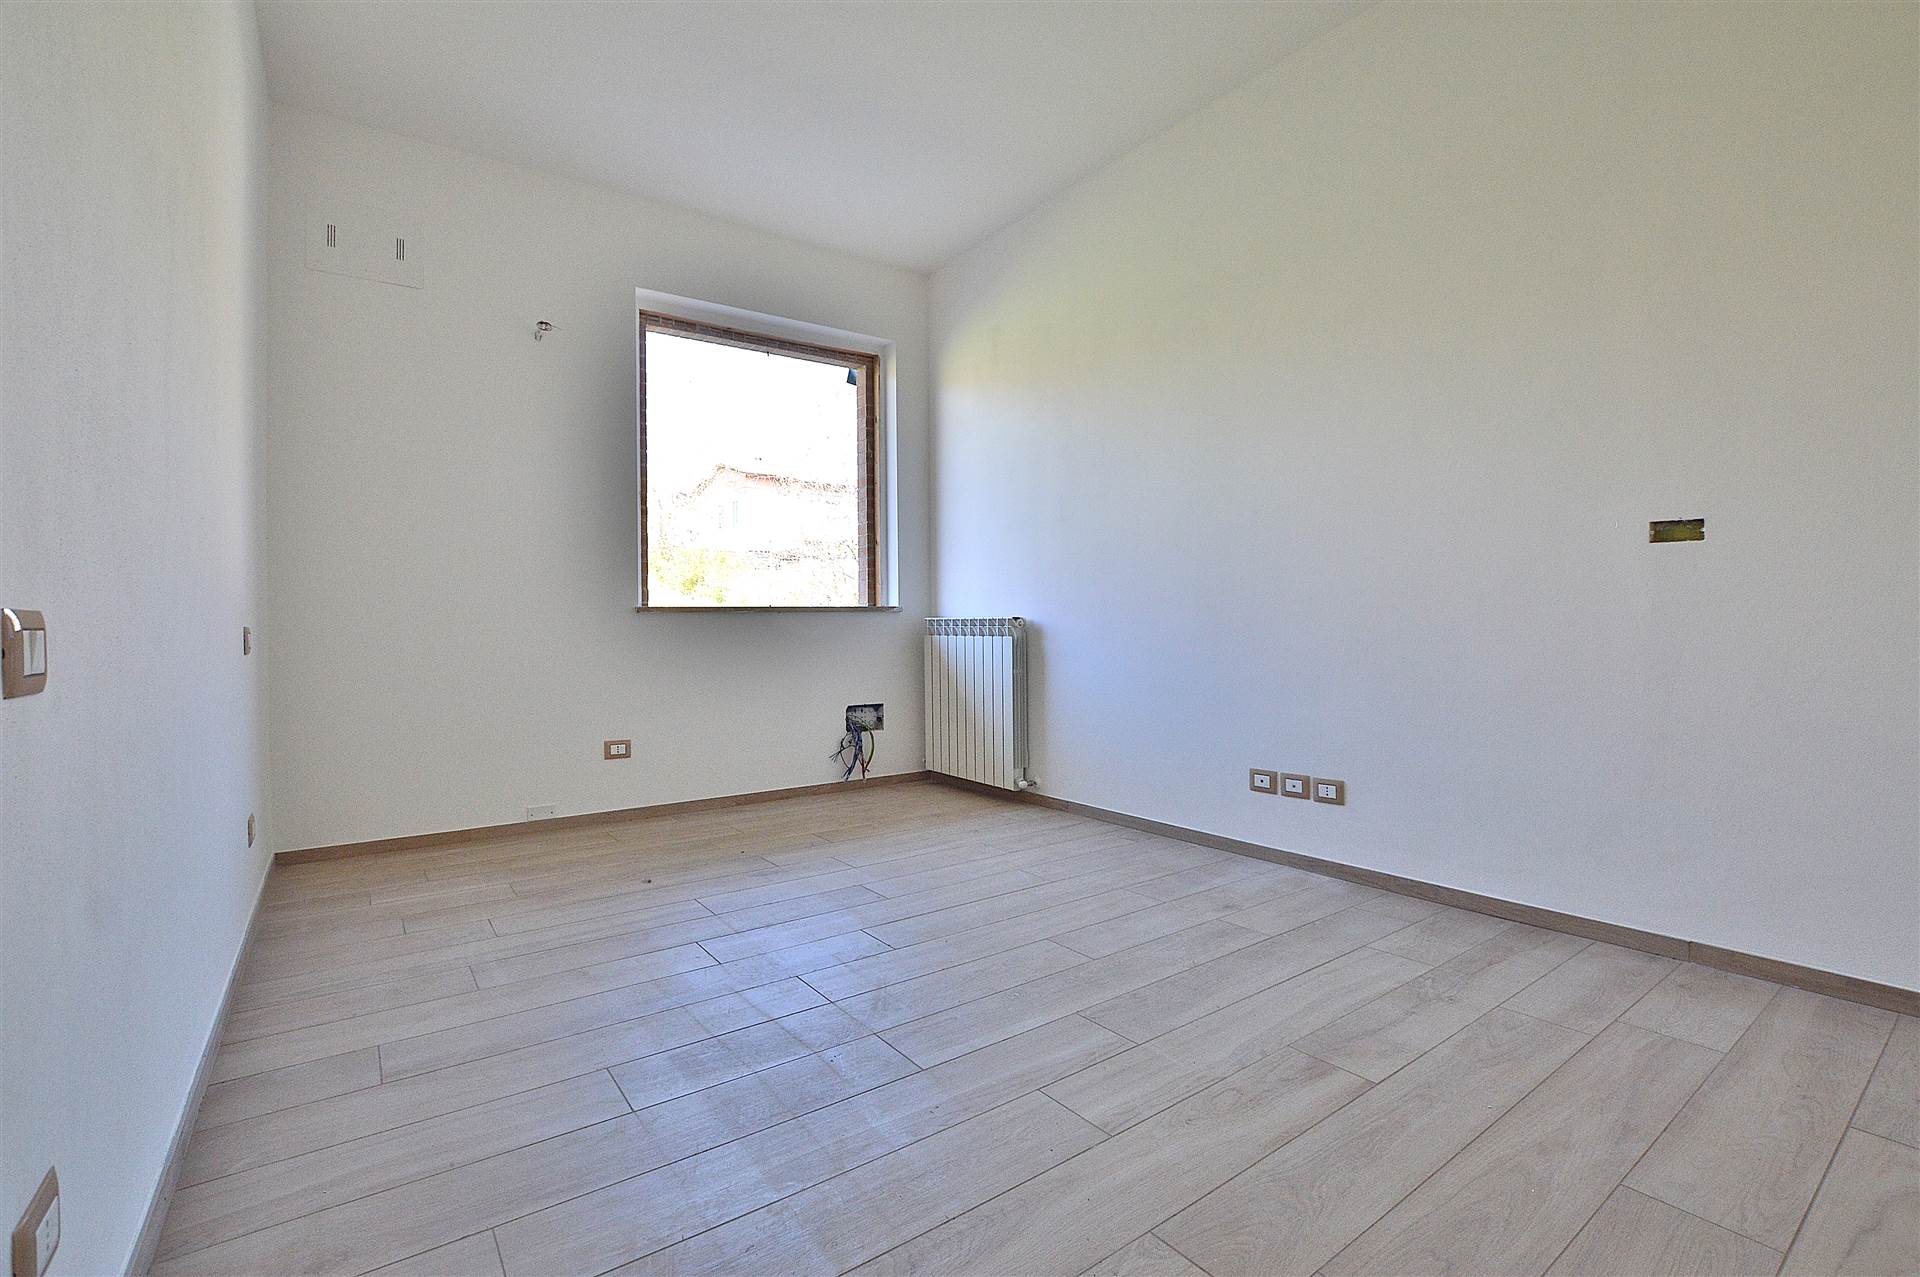 DUE PONTI, SIENA, Apartment for sale of 120 Sq. mt., Restored, Heating Individual heating system, Energetic class: C, Epi: 50 kwh/m2 year, placed at 1° on 2, composed by: 4 Rooms, Kitchenette, , 3 